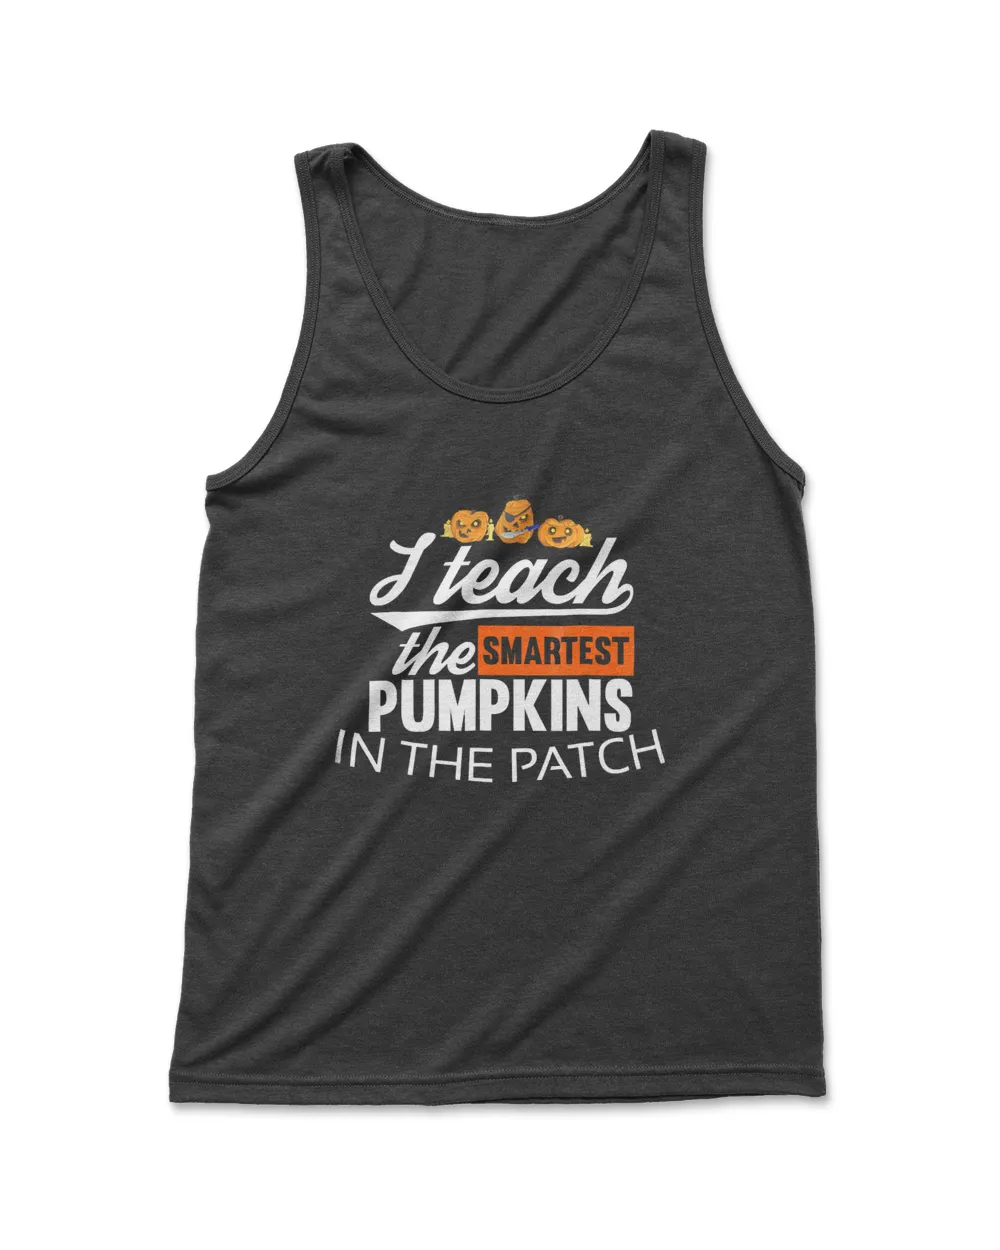 I Teach The Smartest Pumpkins In The Patch Shirt